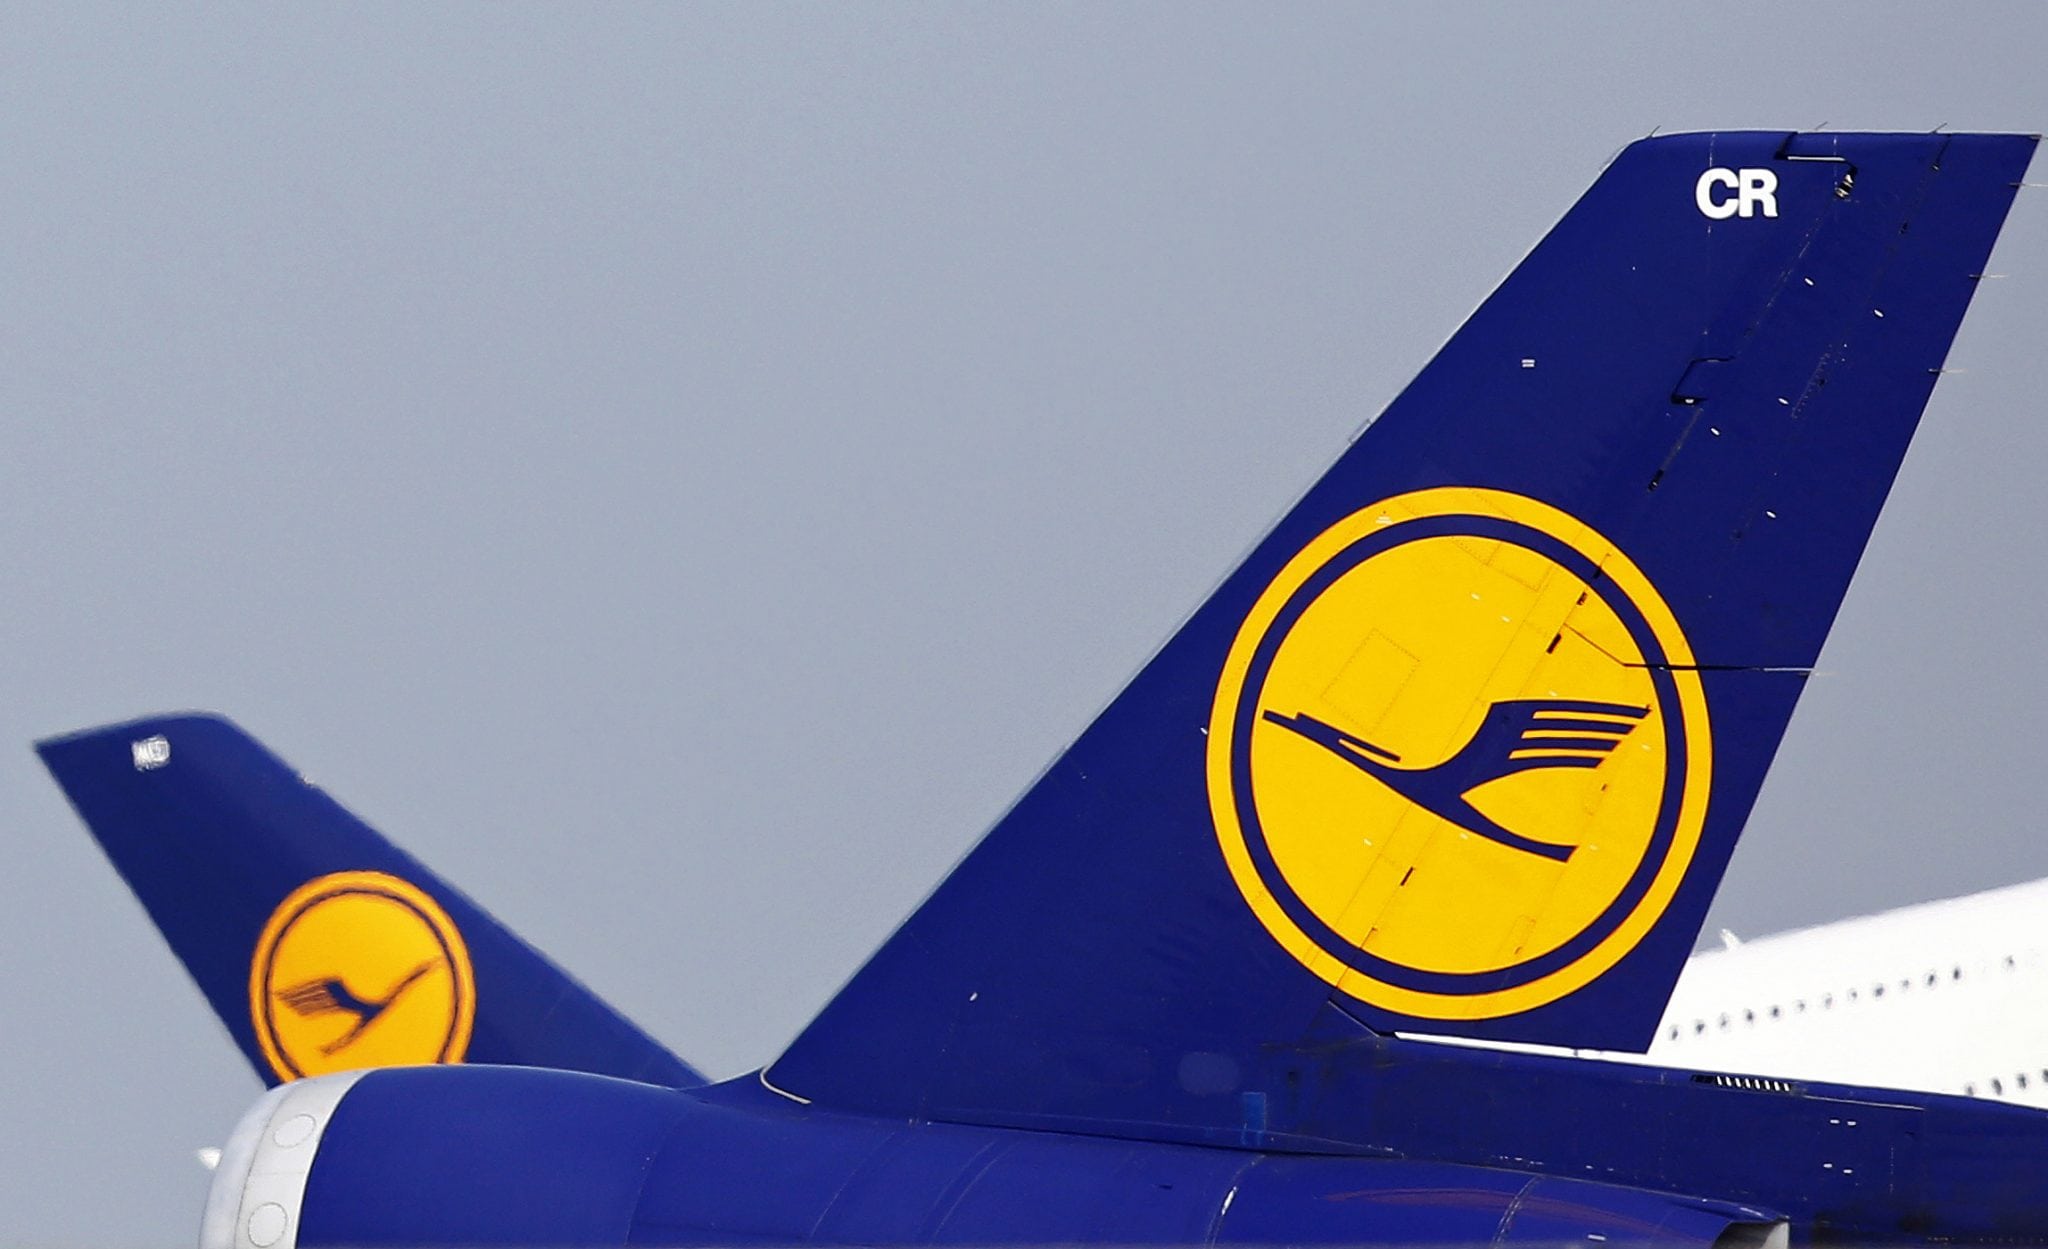 The tails of German air carrier Lufthansa aircraft are seen at Fraport airport in Frankfurt. 